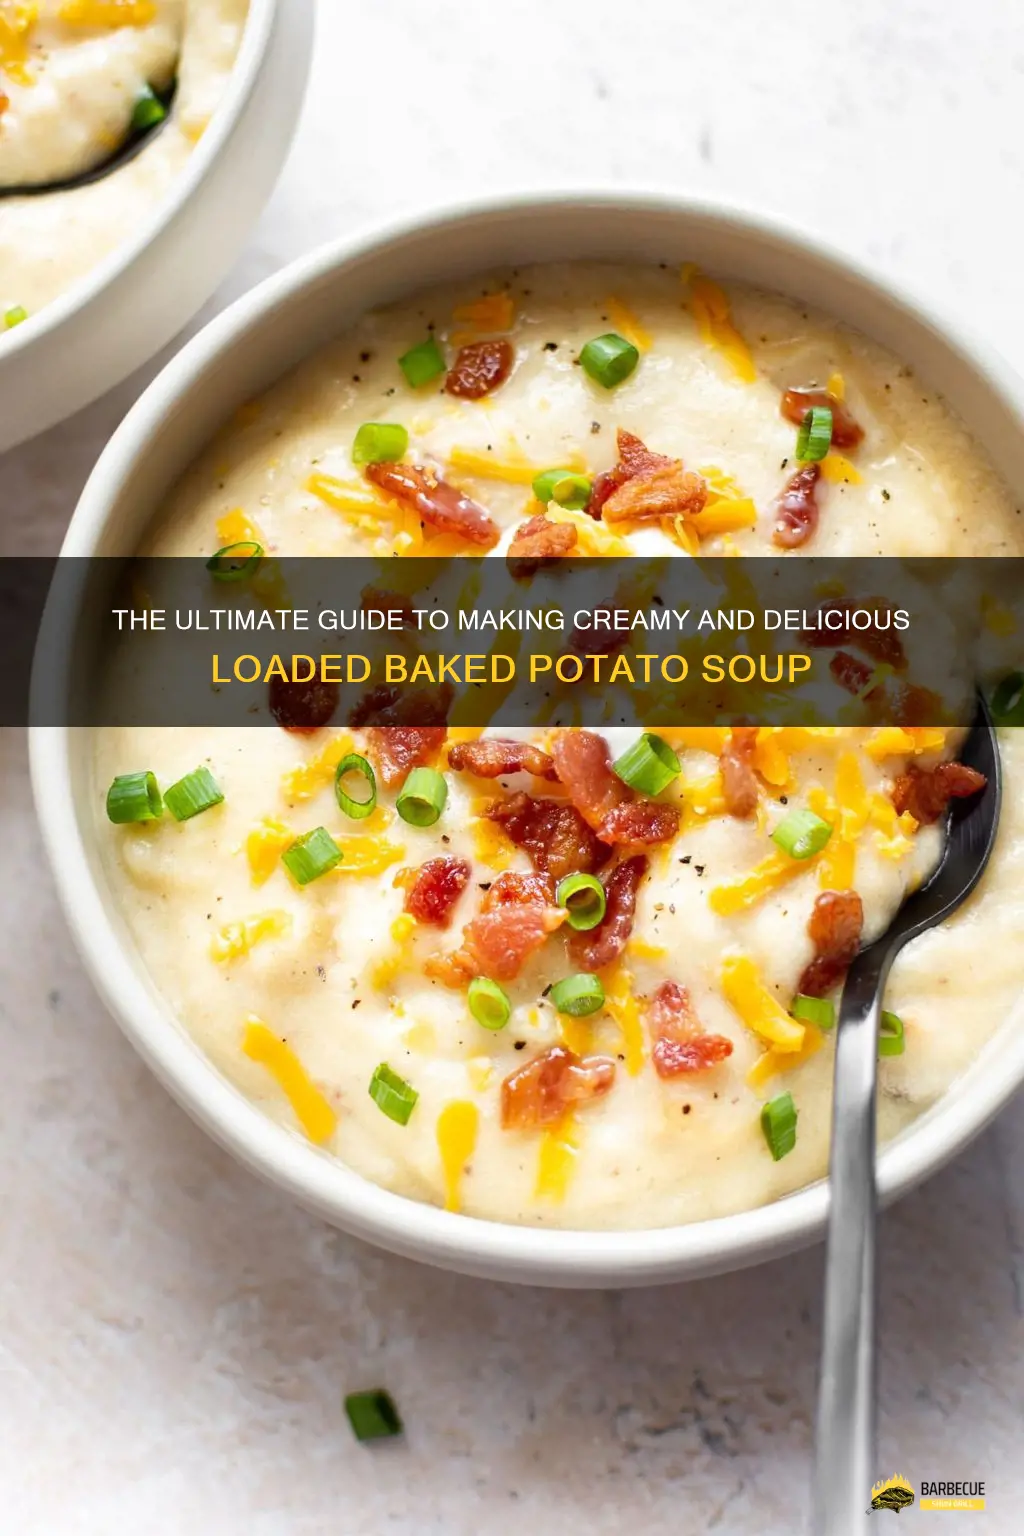 The Ultimate Guide To Making Creamy And Delicious Loaded Baked Potato ...